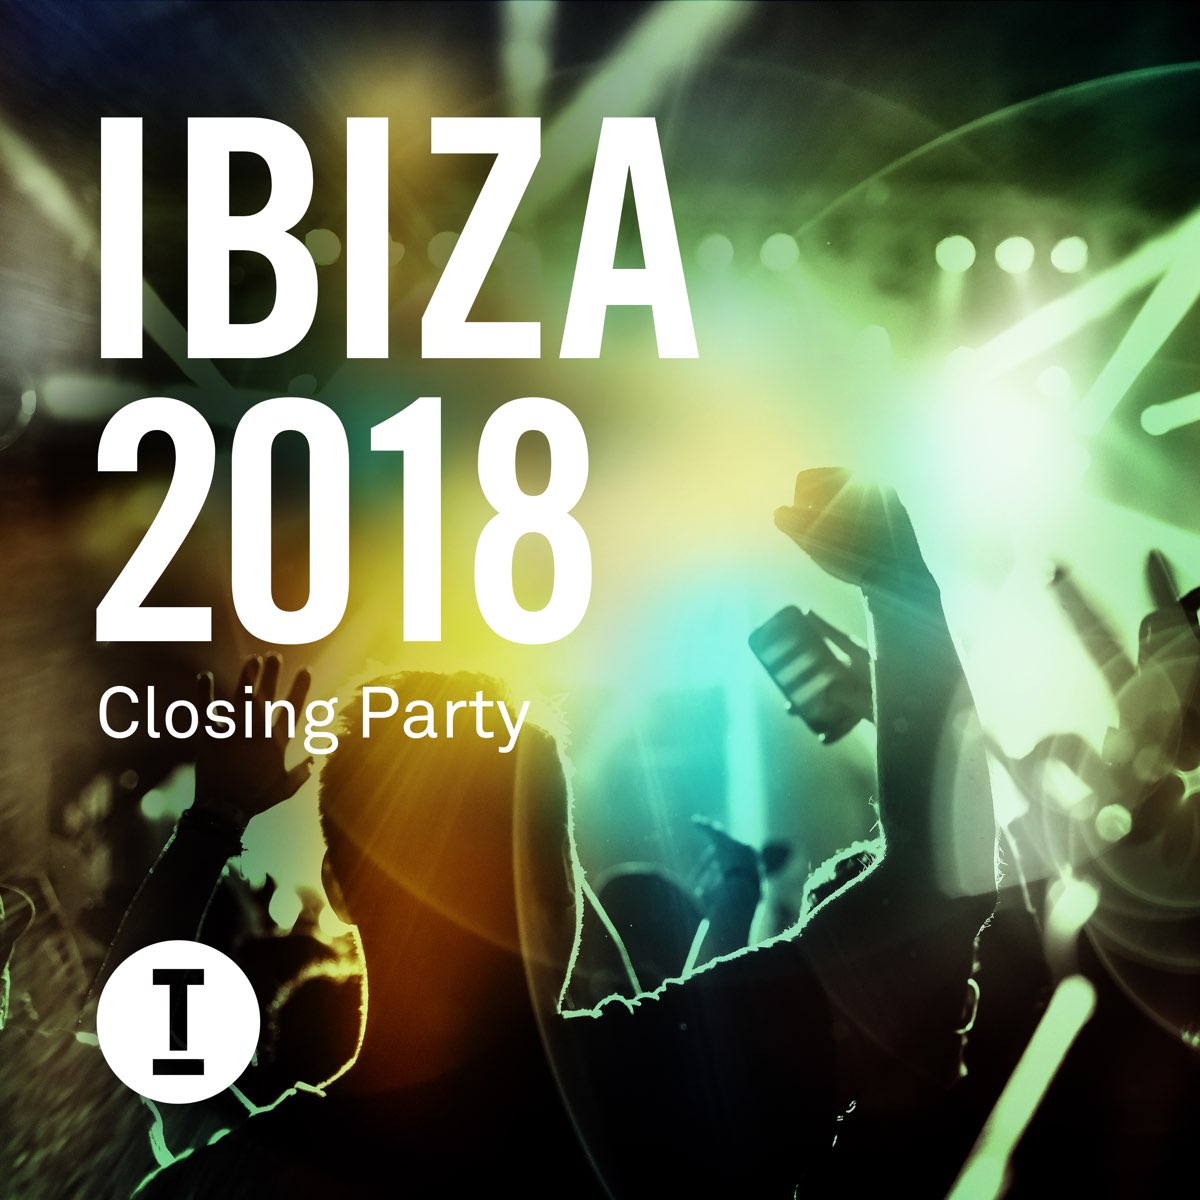 Flac 2018. Ибица (2018). Closing Party Ibiza. Ибица 2018 музыка. Closed Party.